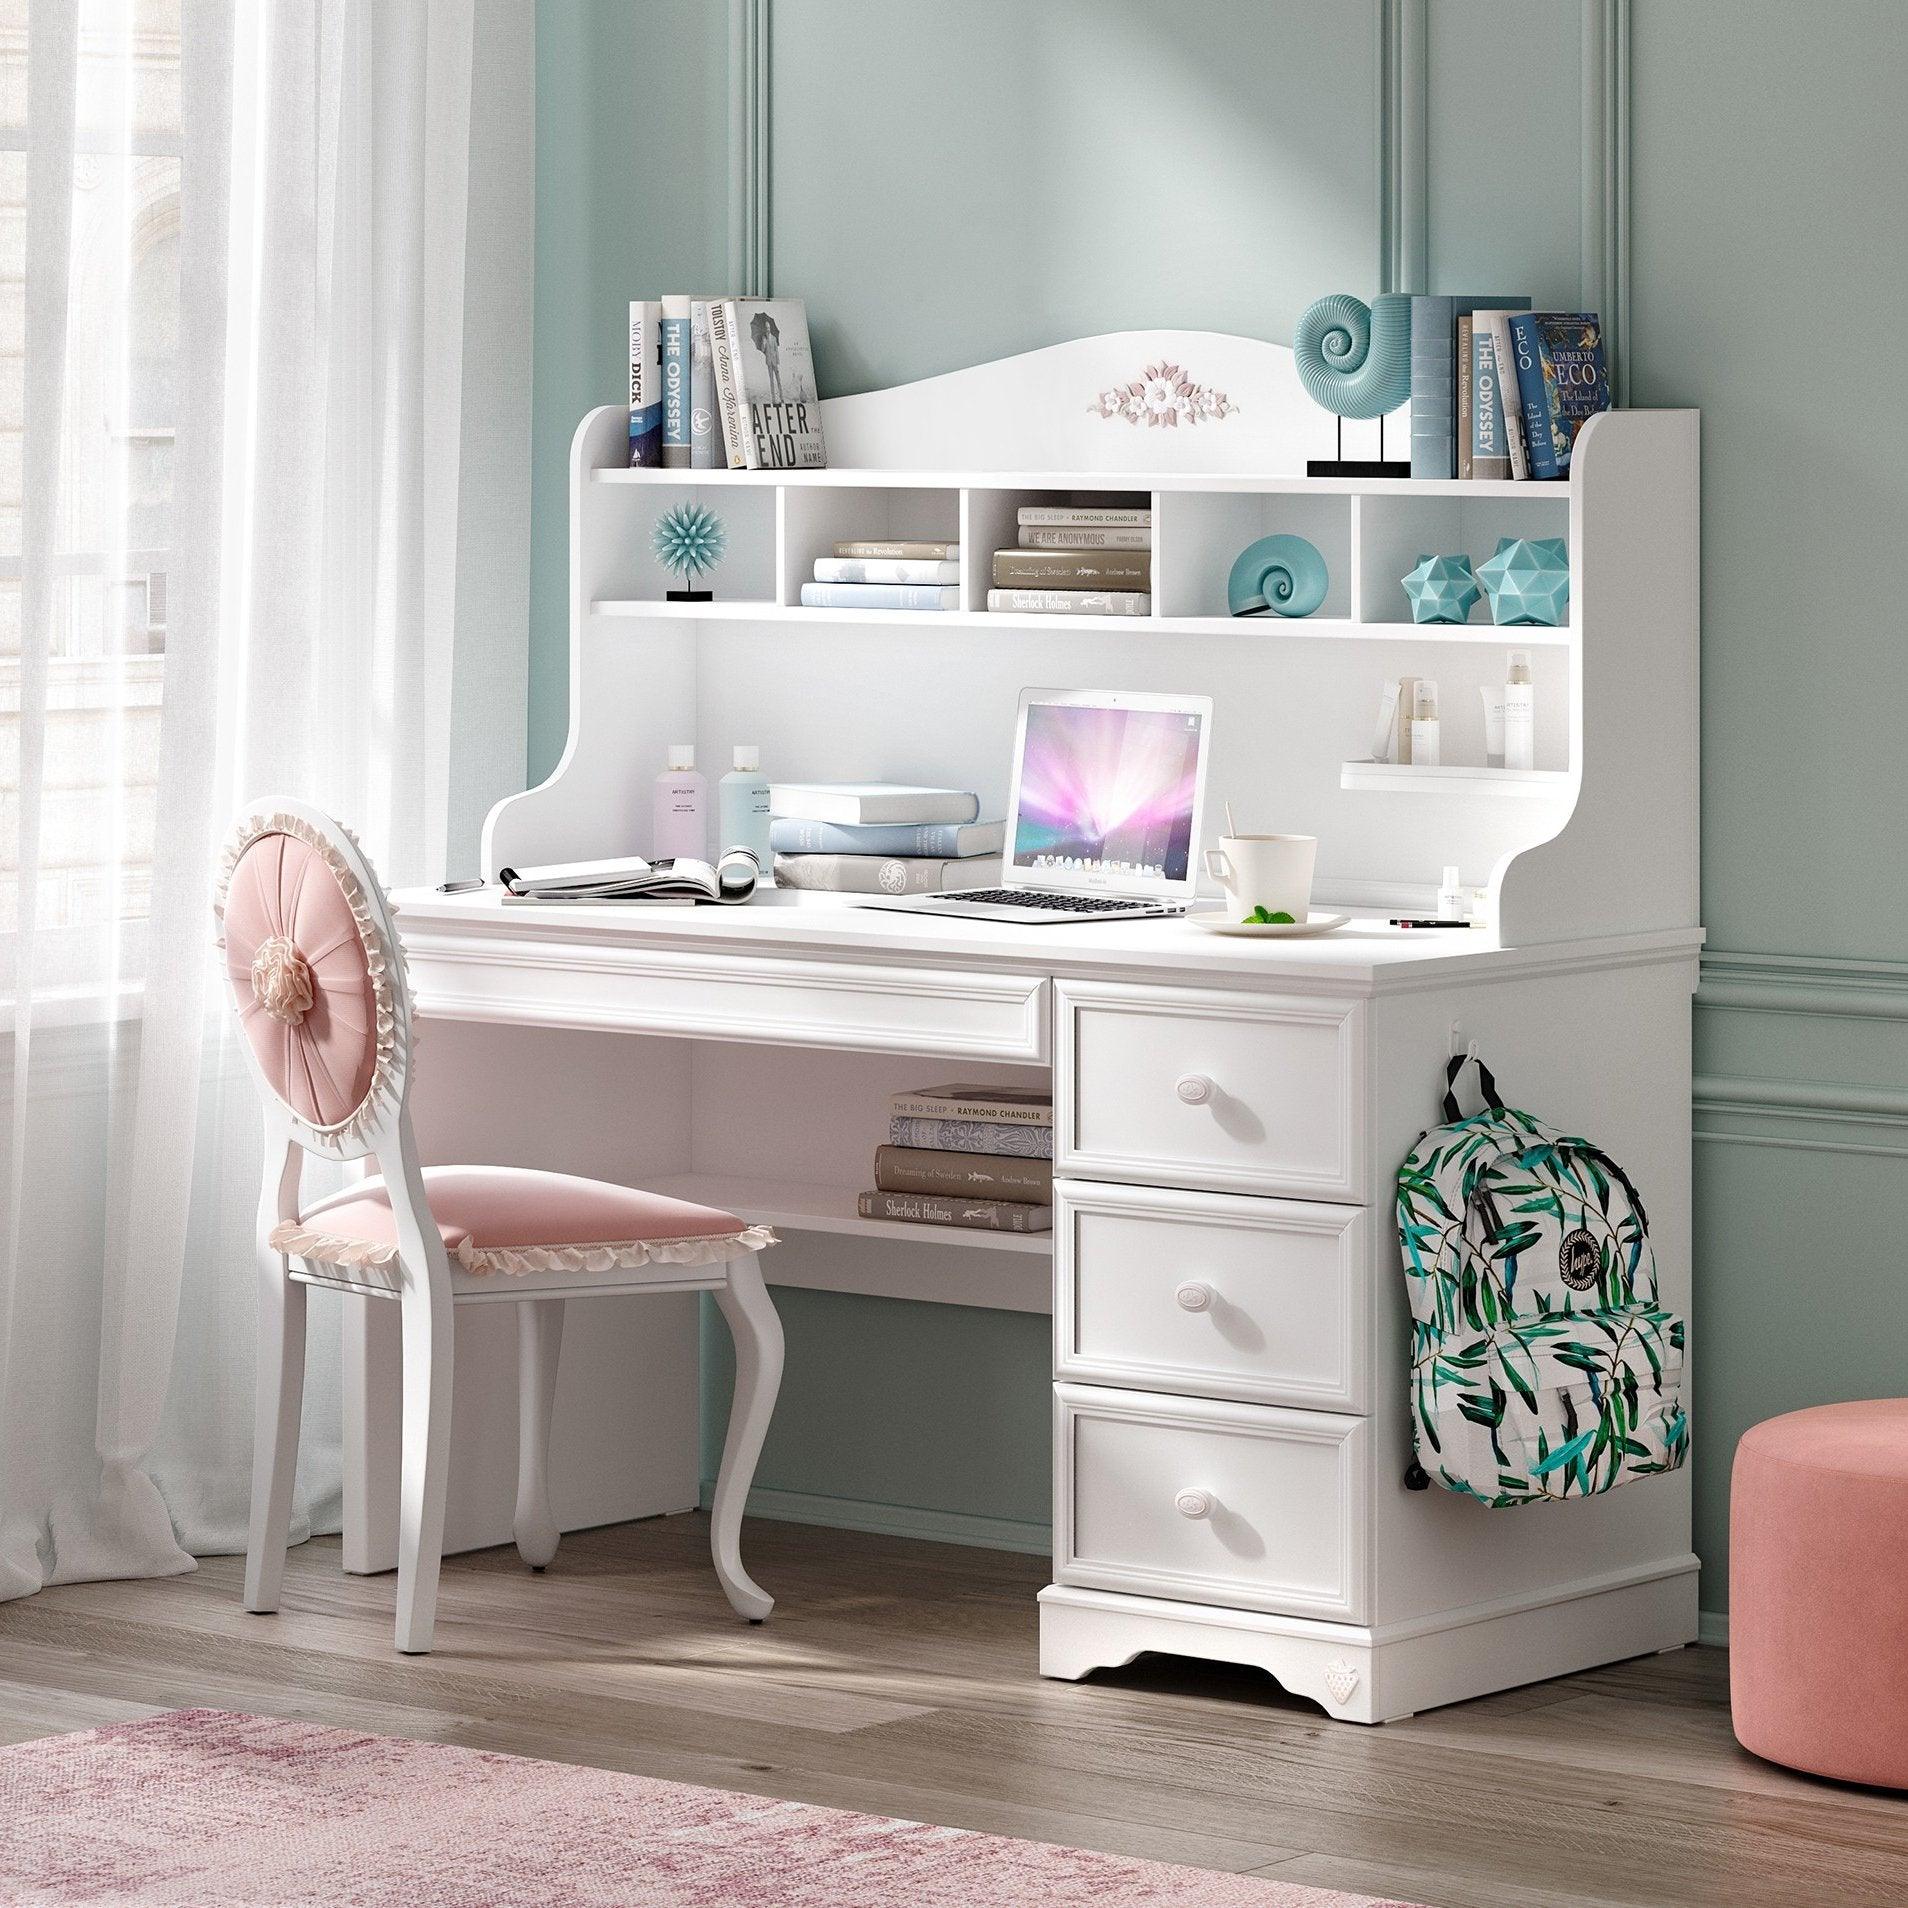 Cilek Rustic White Study Desk With Unit